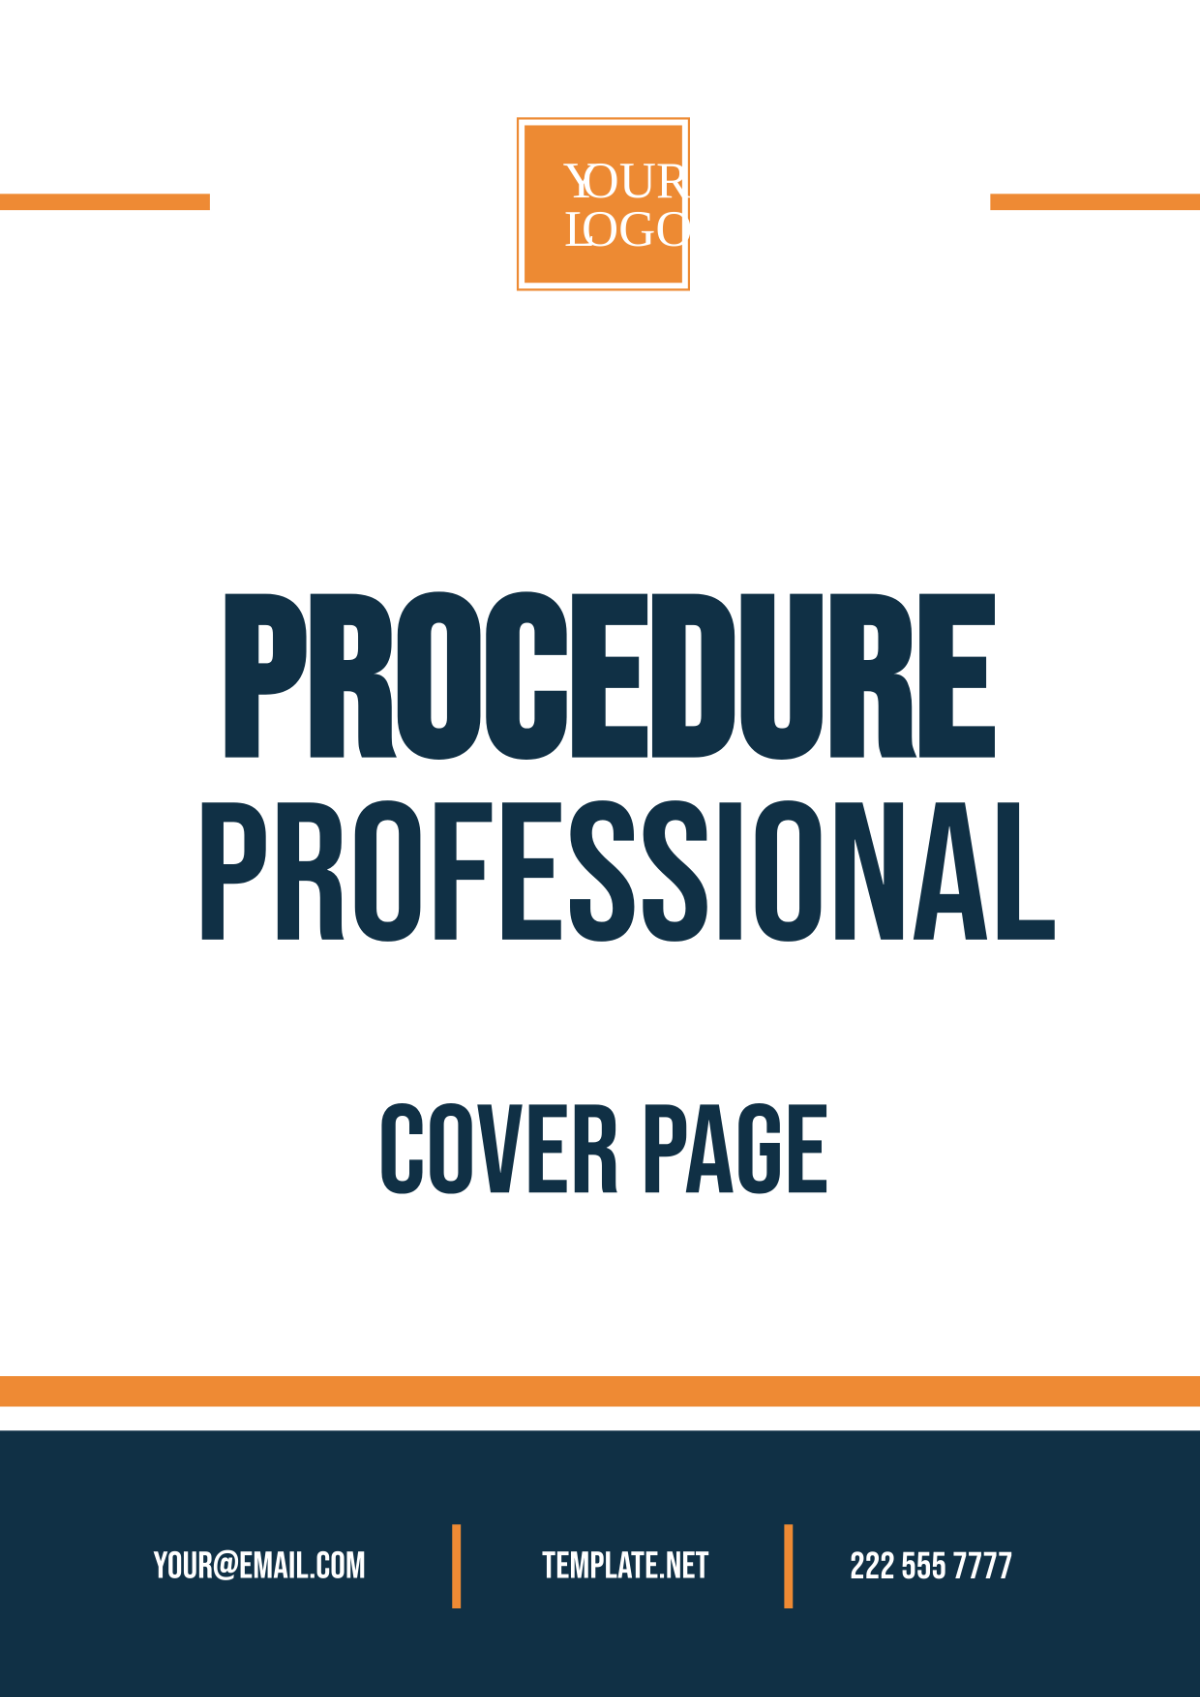 Procedure Professional Cover Page Template